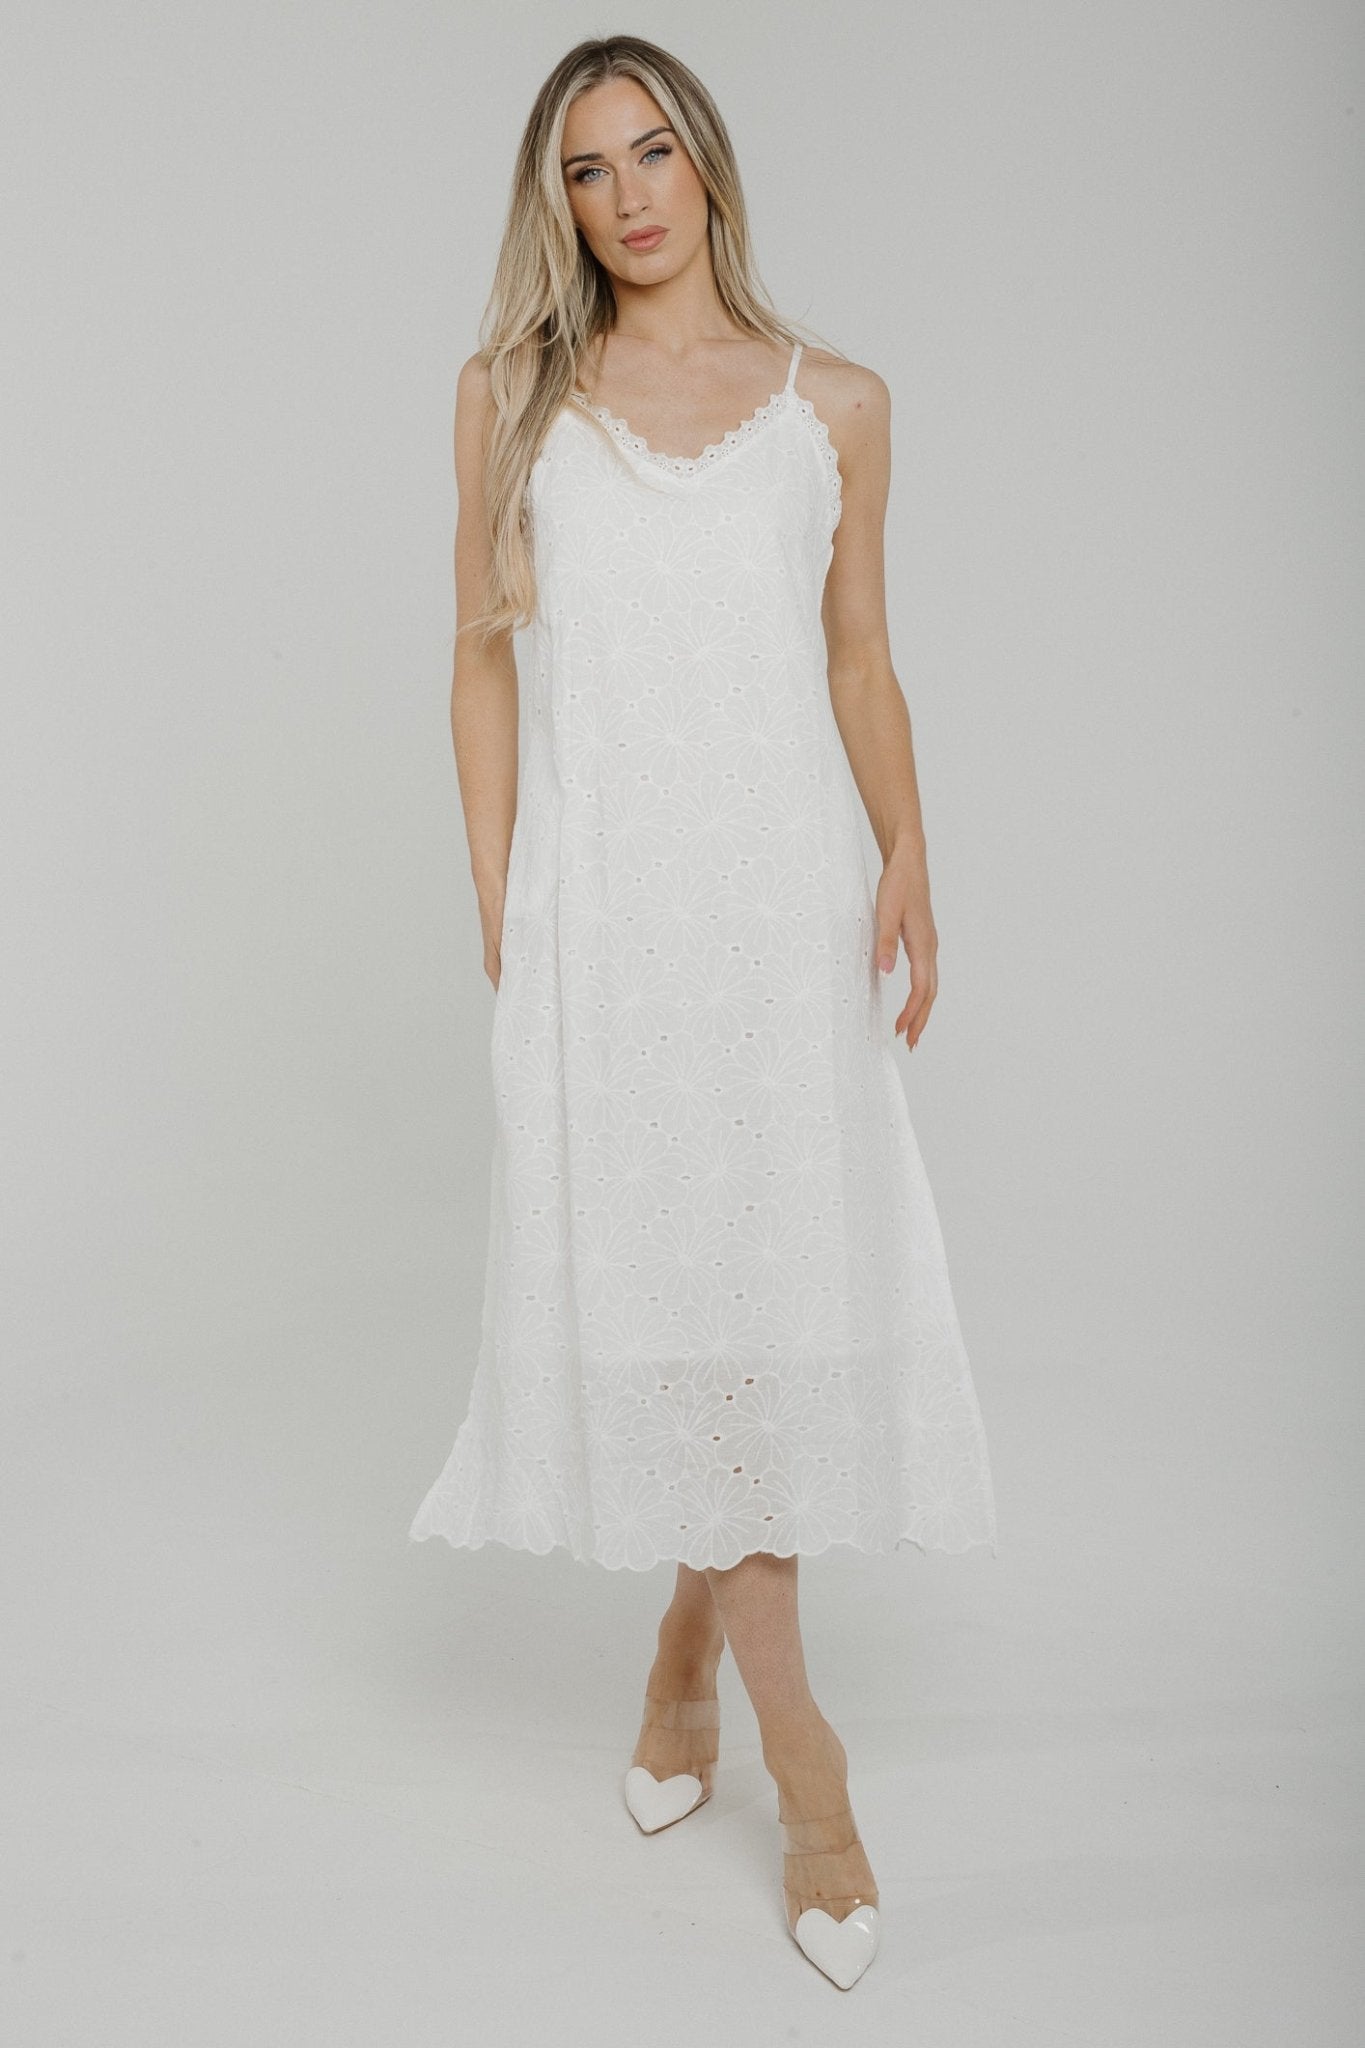 Kendra Broderie Anglaise Dress In White - The Walk in Wardrobe